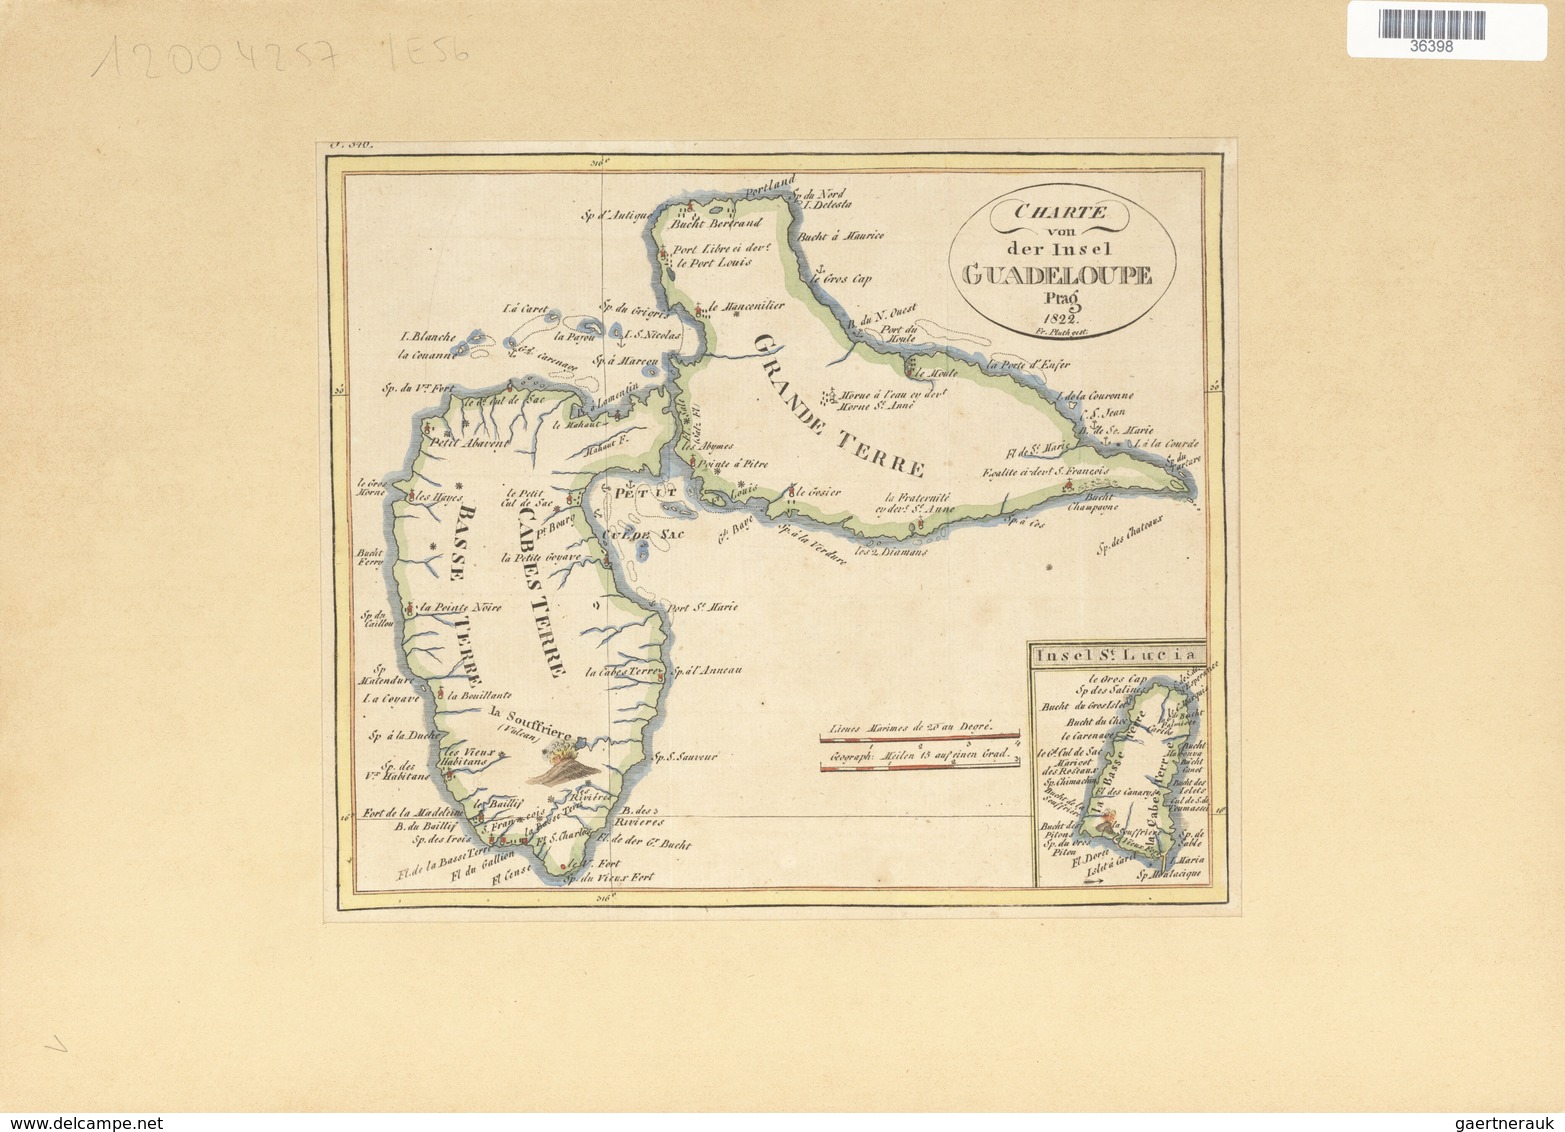 Landkarten Und Stiche: 1822. Map Of The Island Of Guadaloupe, By One Fr. Pluth, From Prague In 1822. - Geographie